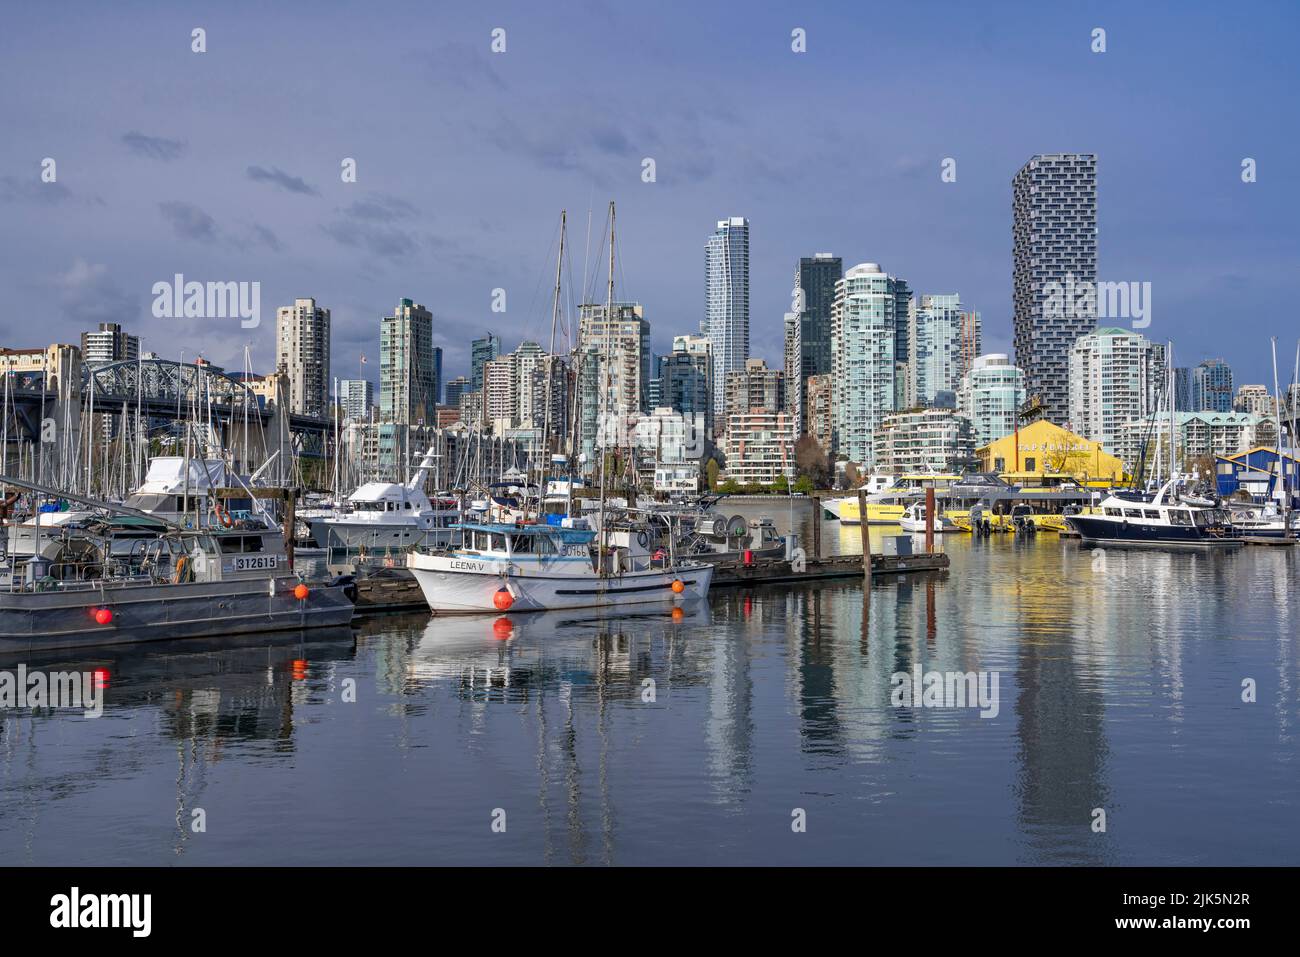 False Creek with reflections of boats and buildings in Vancouver, British Columbia, Canada. Stock Photo